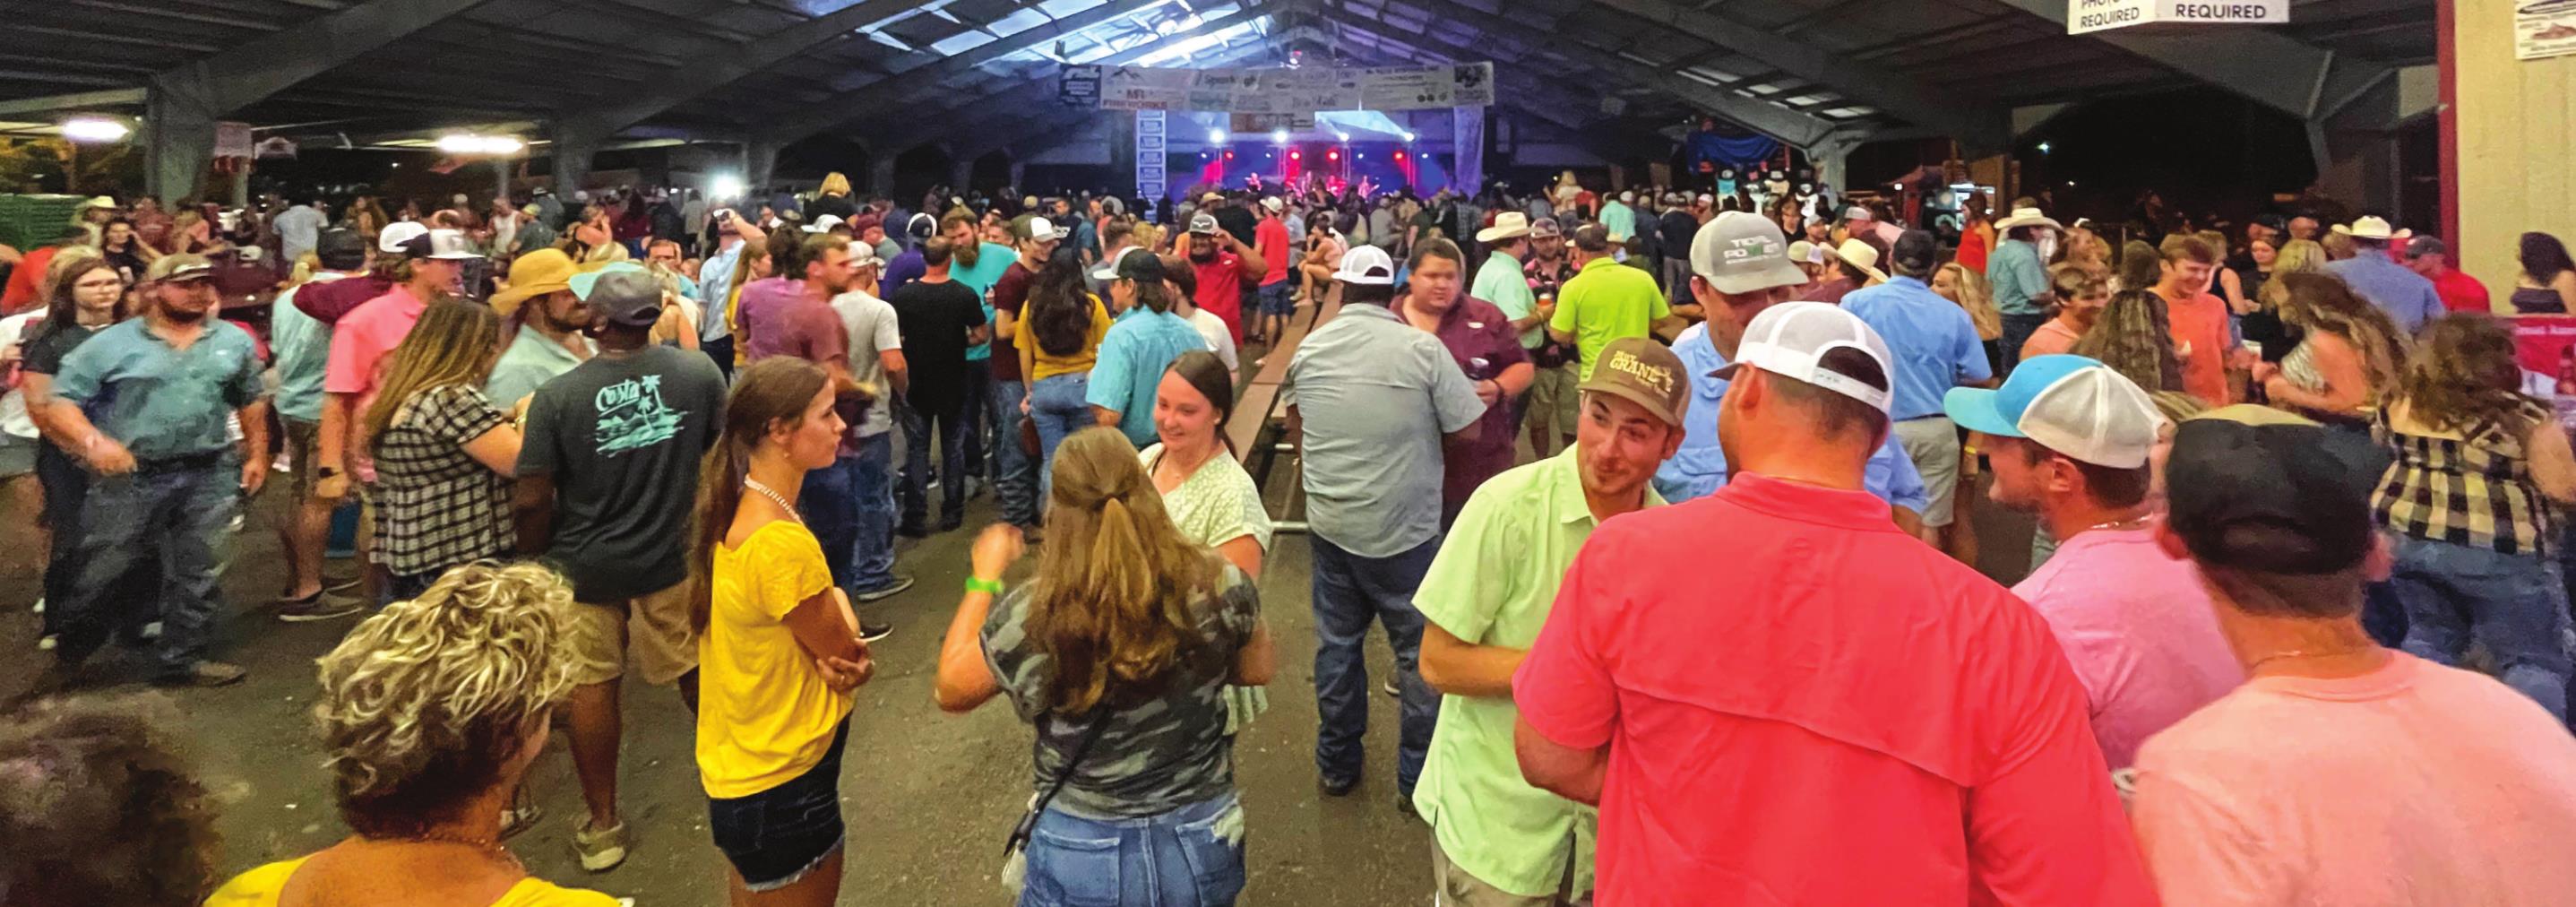 Schulenburg Festival Attendance Down from Previous Years, But Event